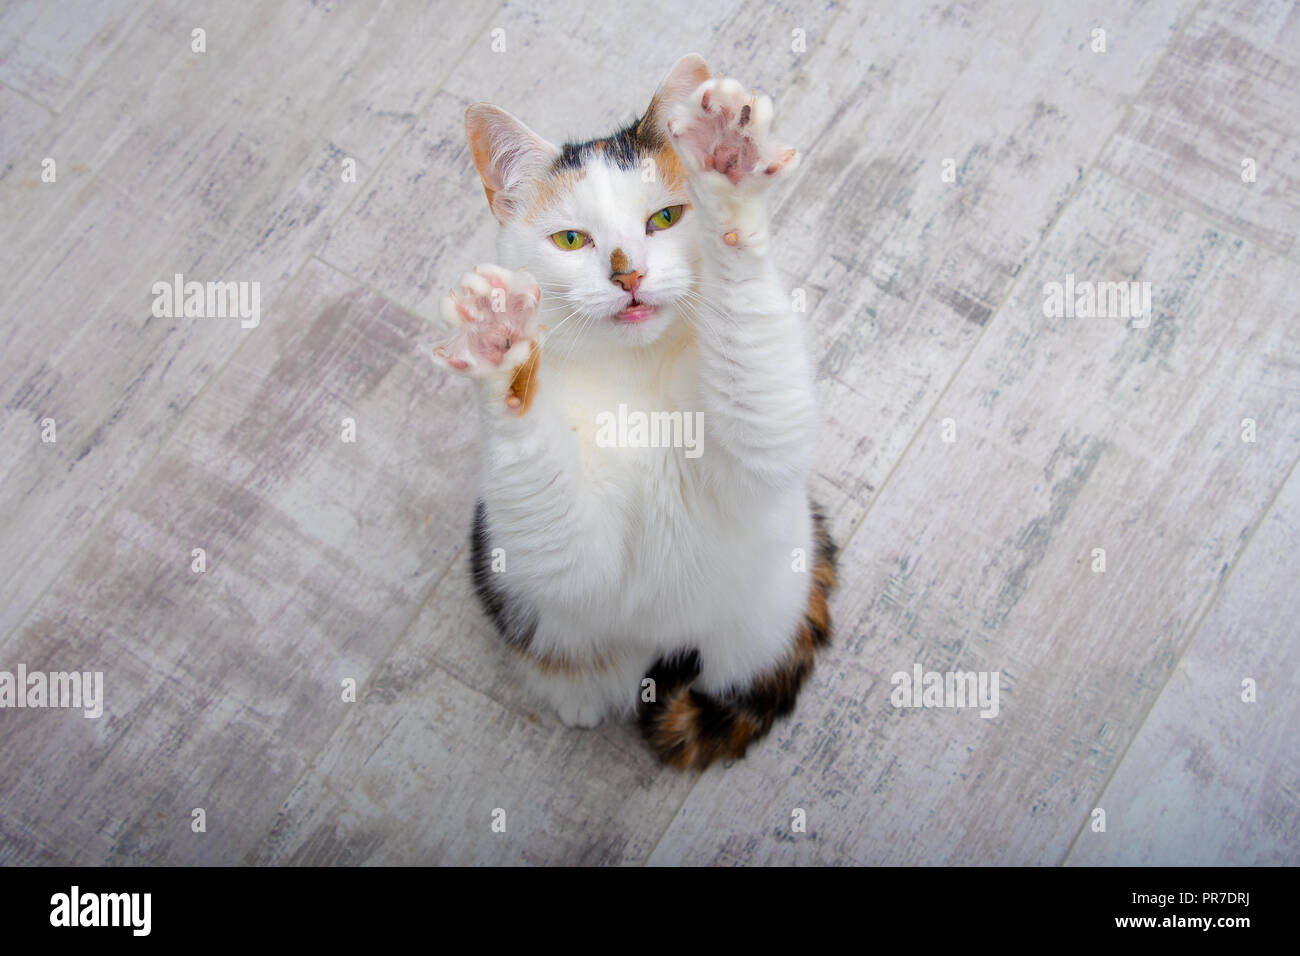 Tortoiseshell cat standing on her back legs reaching up into the air Stock Photo